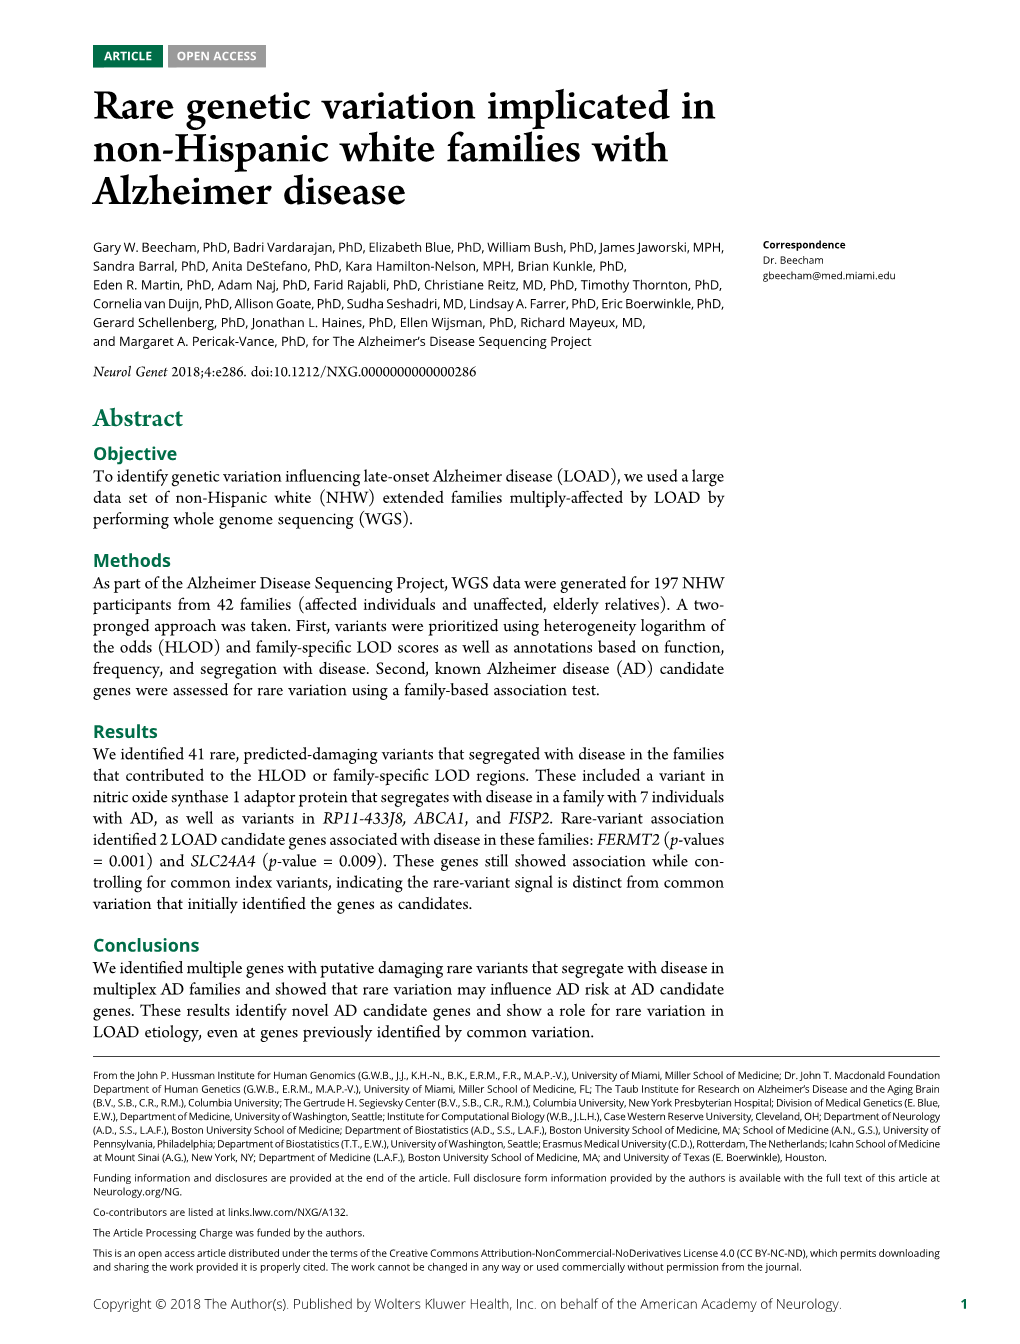 Full Disclosure Form Information Provided by the Authors Is Available with the Full Text of This Article at Neurology.Org/NG